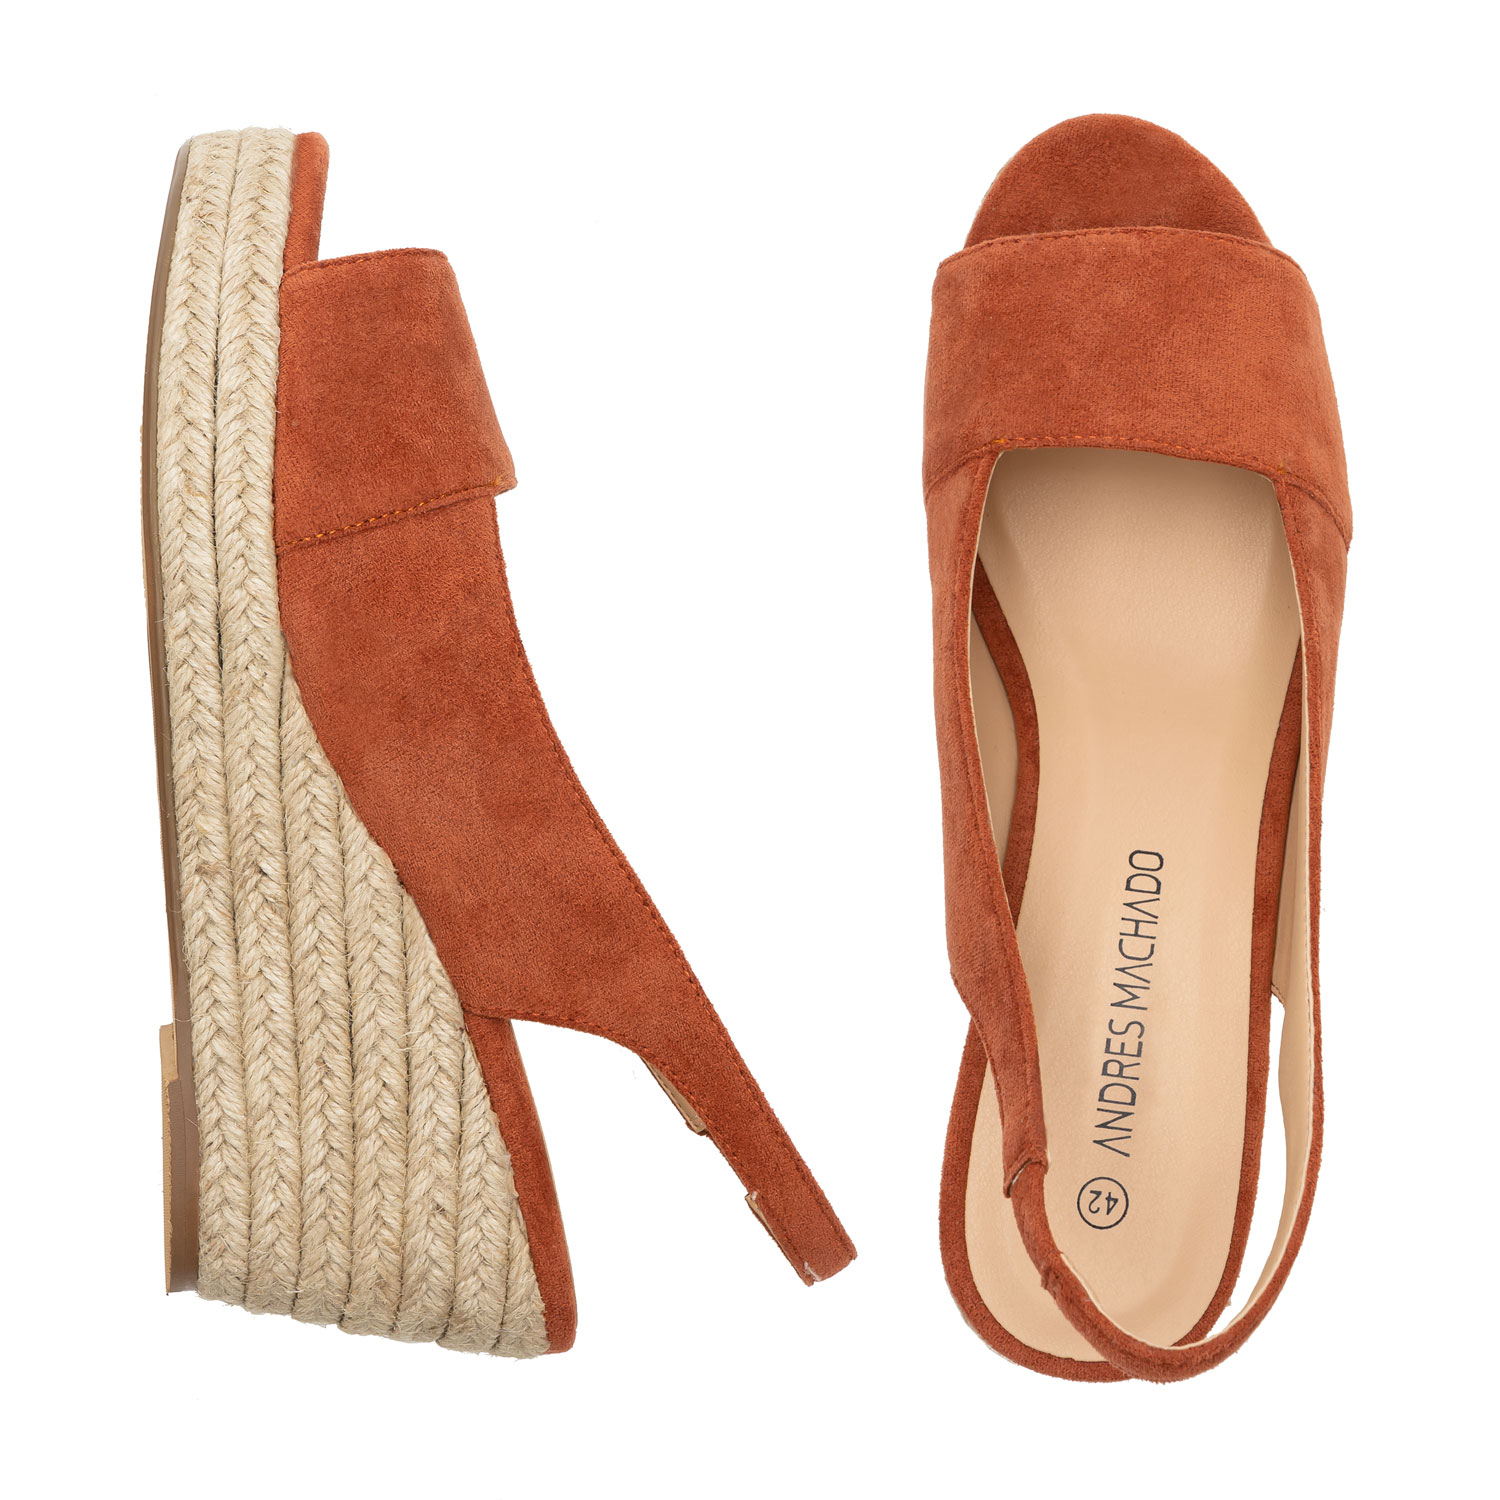 Brick-Red Faux Suede Espadrilles with Jute Wedge 